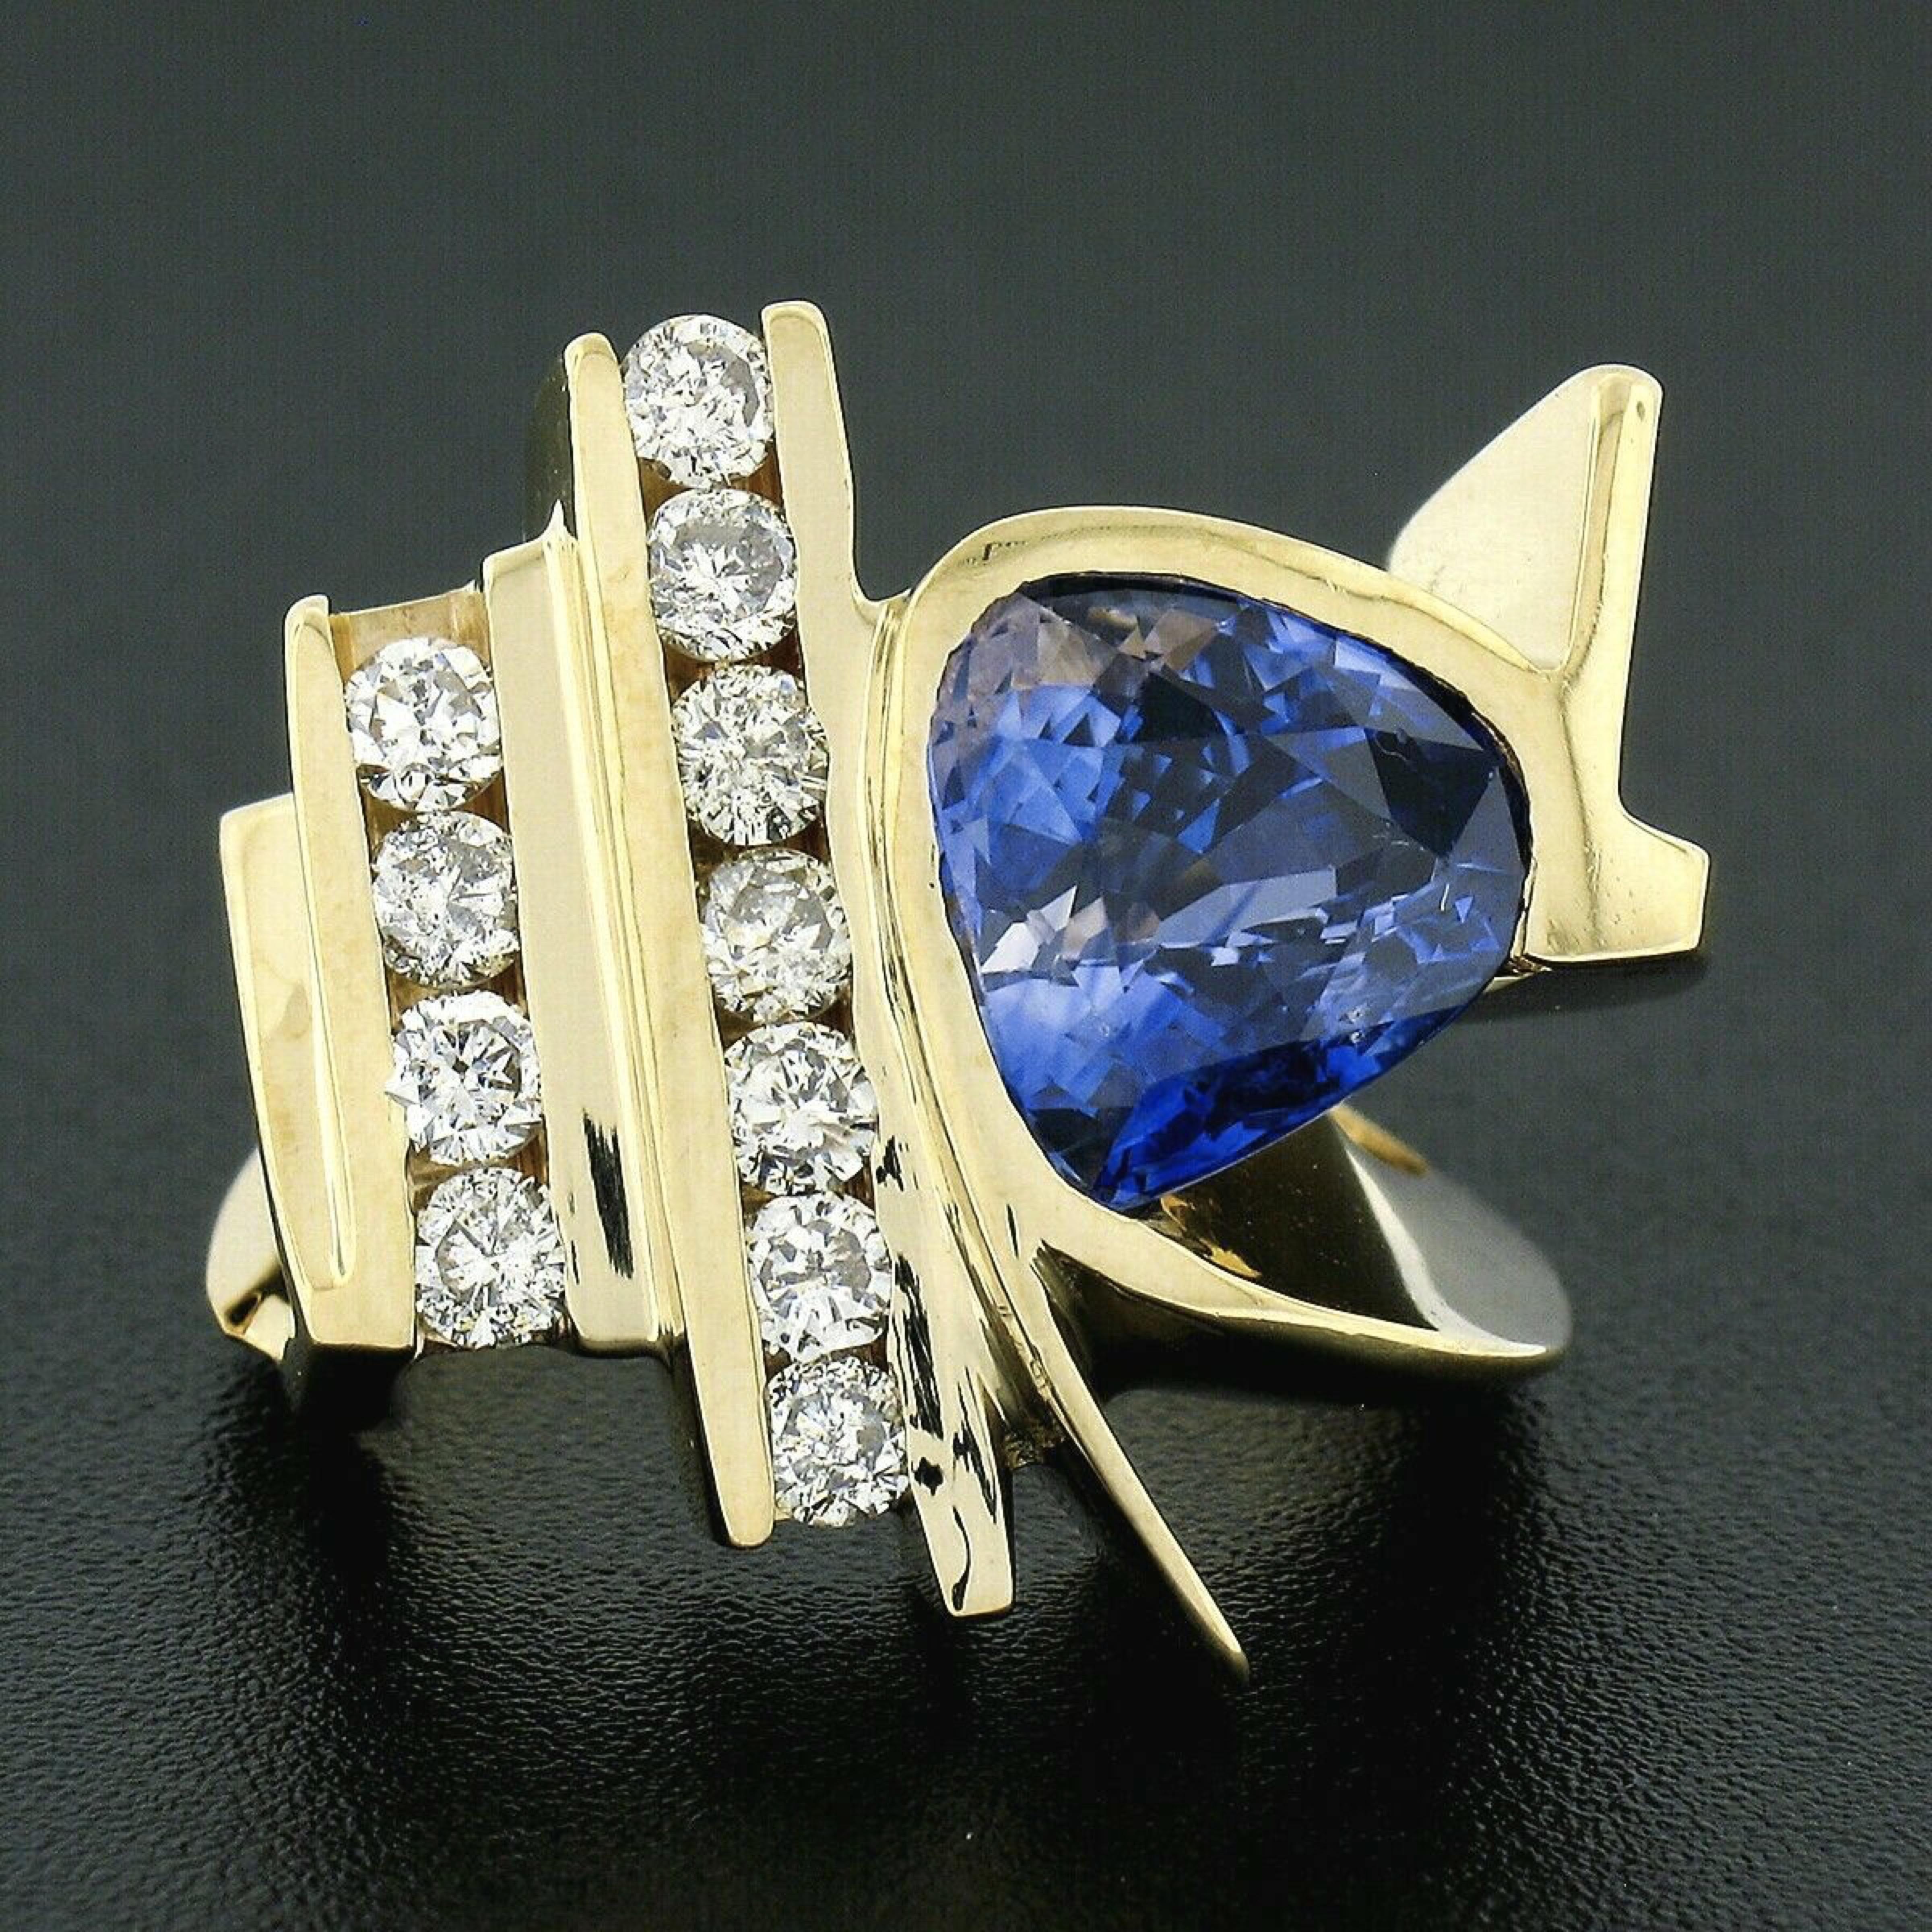 Here we have a magnificent cocktail ring crafted in solid 14k yellow gold. This large ring features a trillion cut tanzanite that is elegantly channel set and displays a gorgeous violetish-blue color that brings a very attractive and desirable look